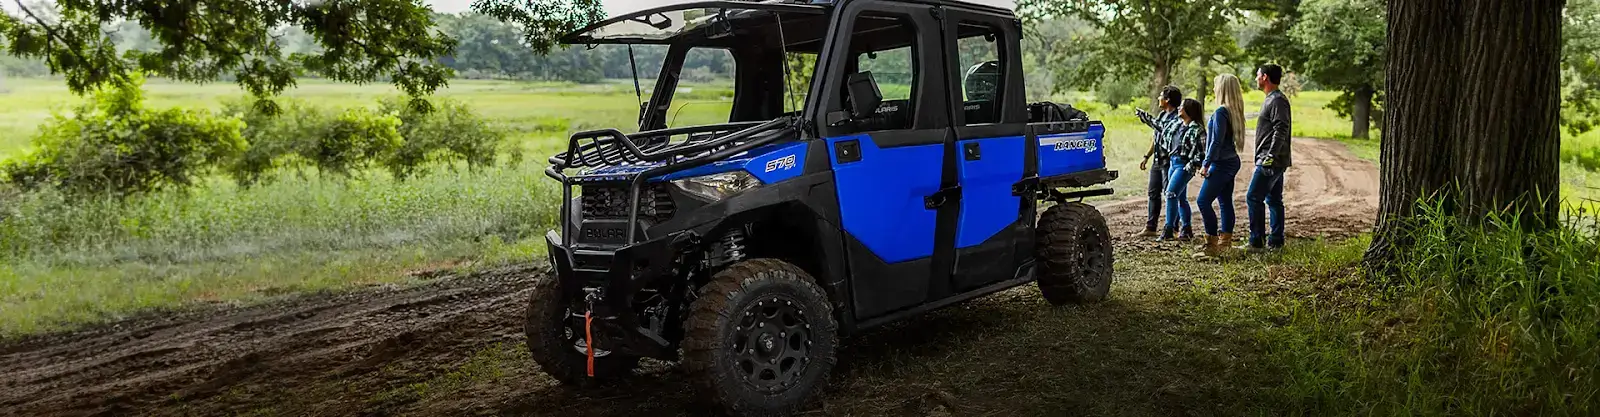 a blue and black ATV with a black roof in Arkansas